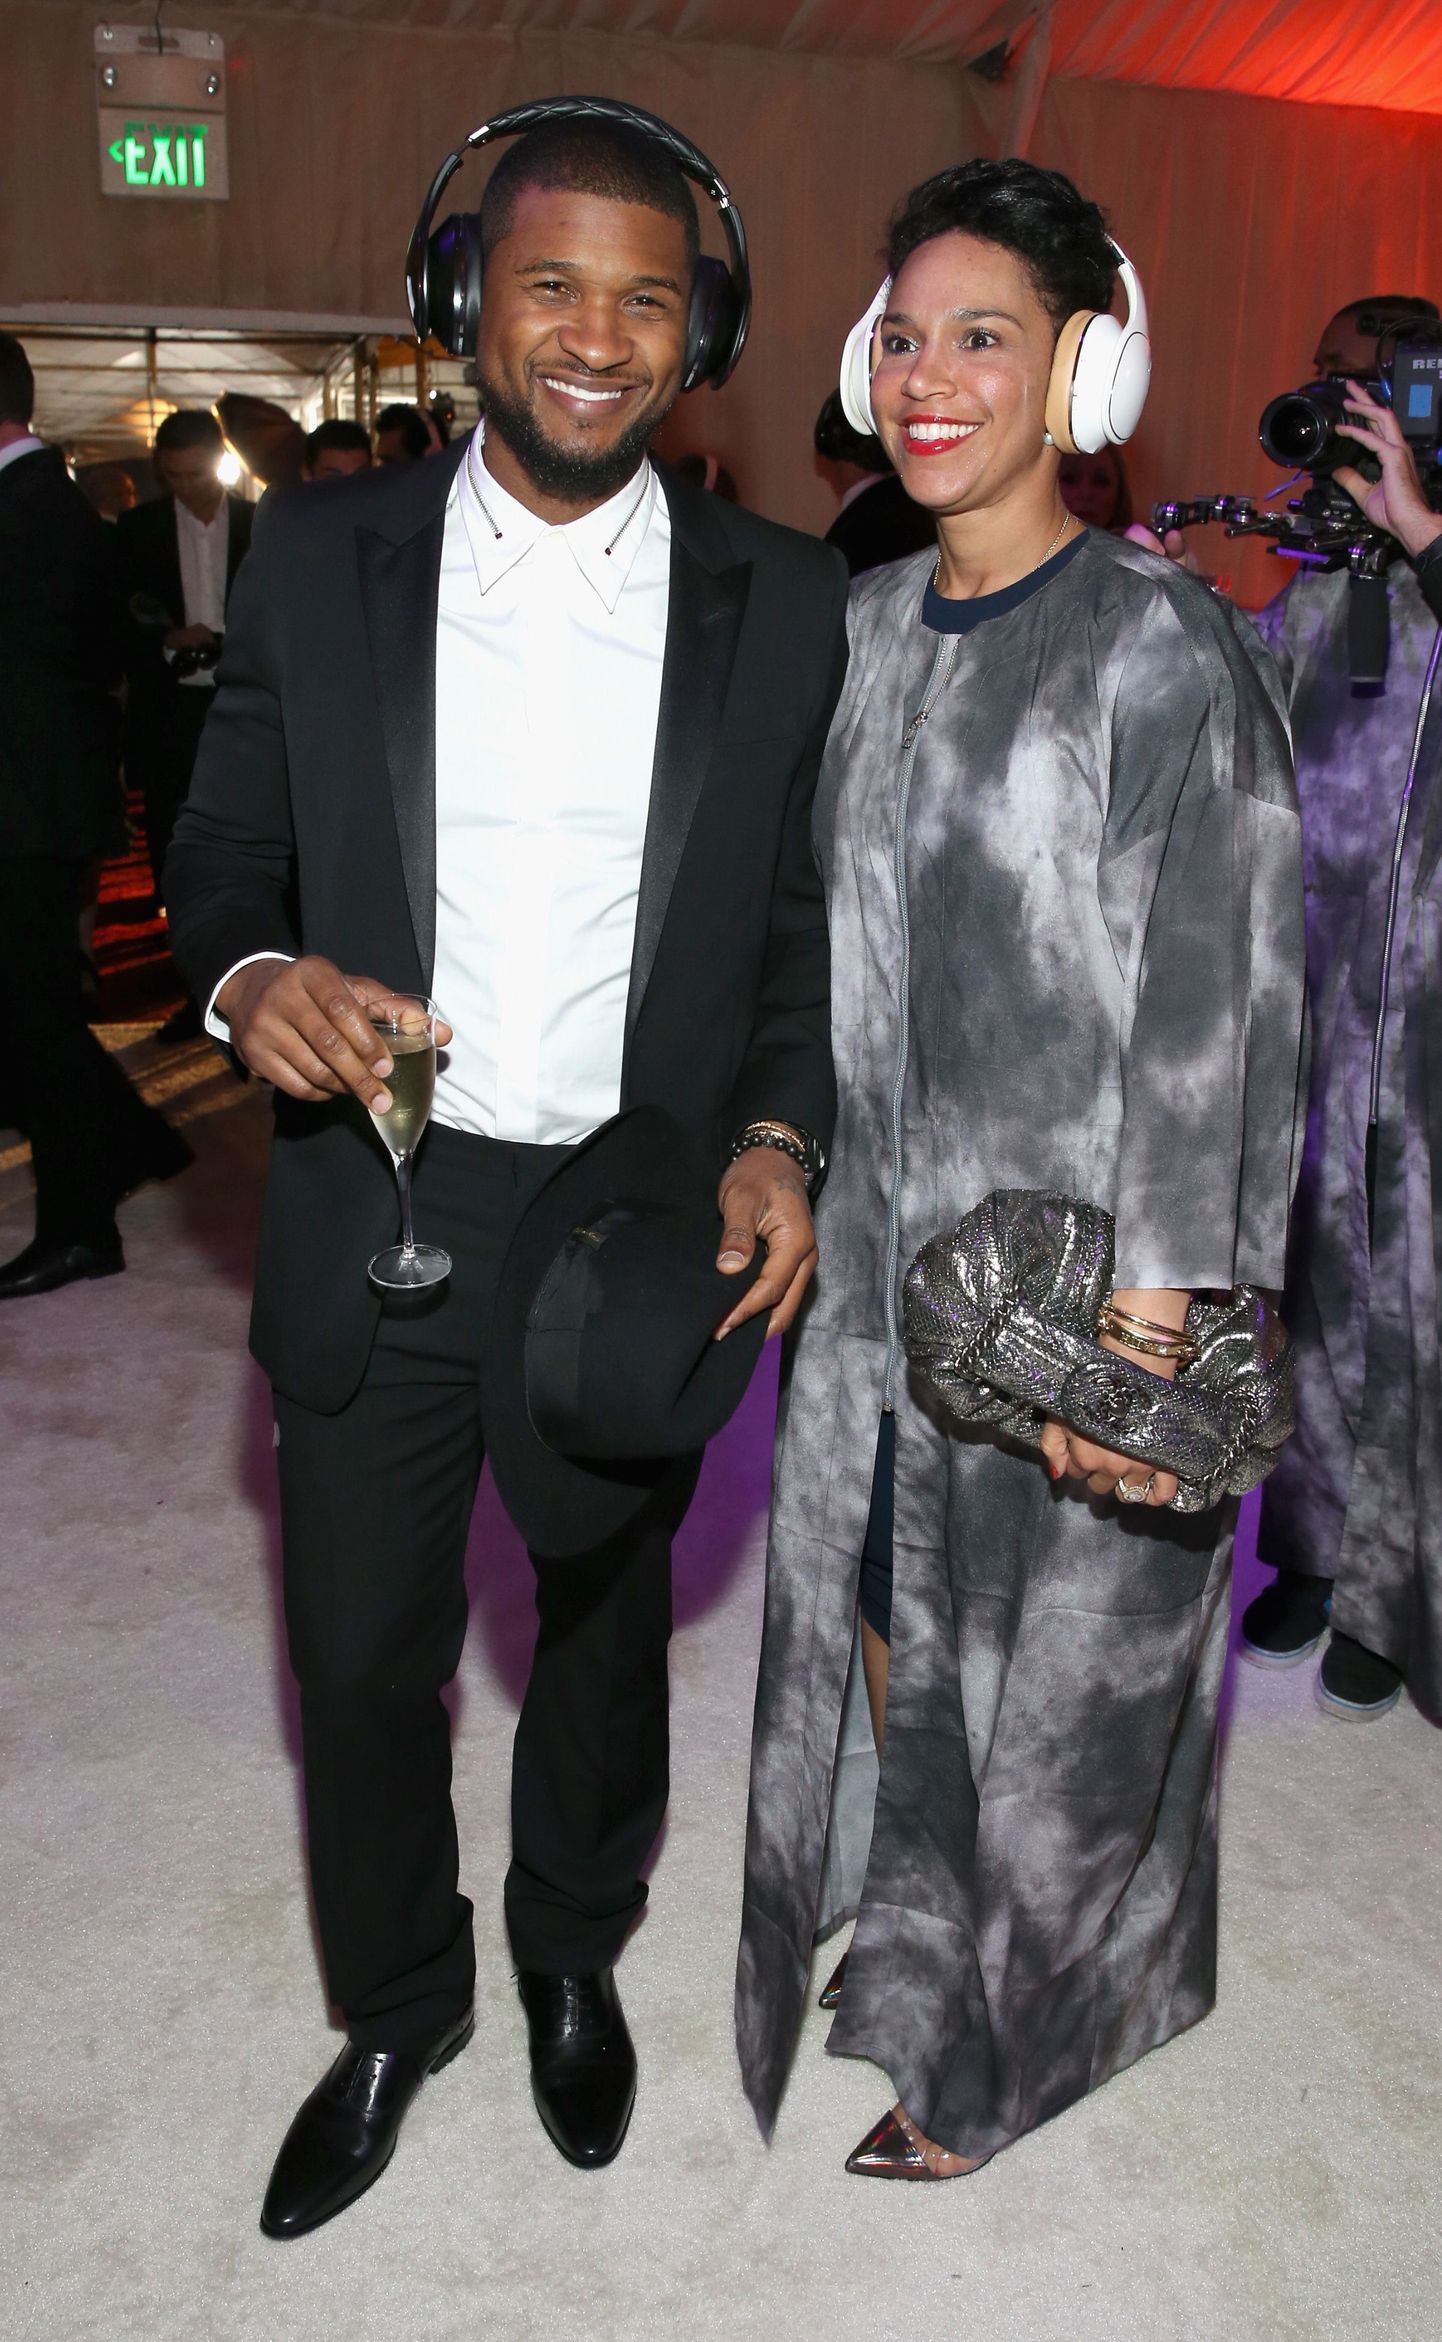 LOS ANGELES, CA - JANUARY 10: Recording artist Usher (L) and Grace Miguel, wearing Samsung Level headphones, attend the Art of Elysium and Samsung Galaxy present Marina Abramovic's HEAVEN at Hangar 8 on January 10, 2015 in Los Angeles, California.   Jonathan Leibson/Getty Images for Samsung/AFP
== FOR NEWSPAPERS, INTERNET, TELCOS & TELEVISION USE ONLY ==